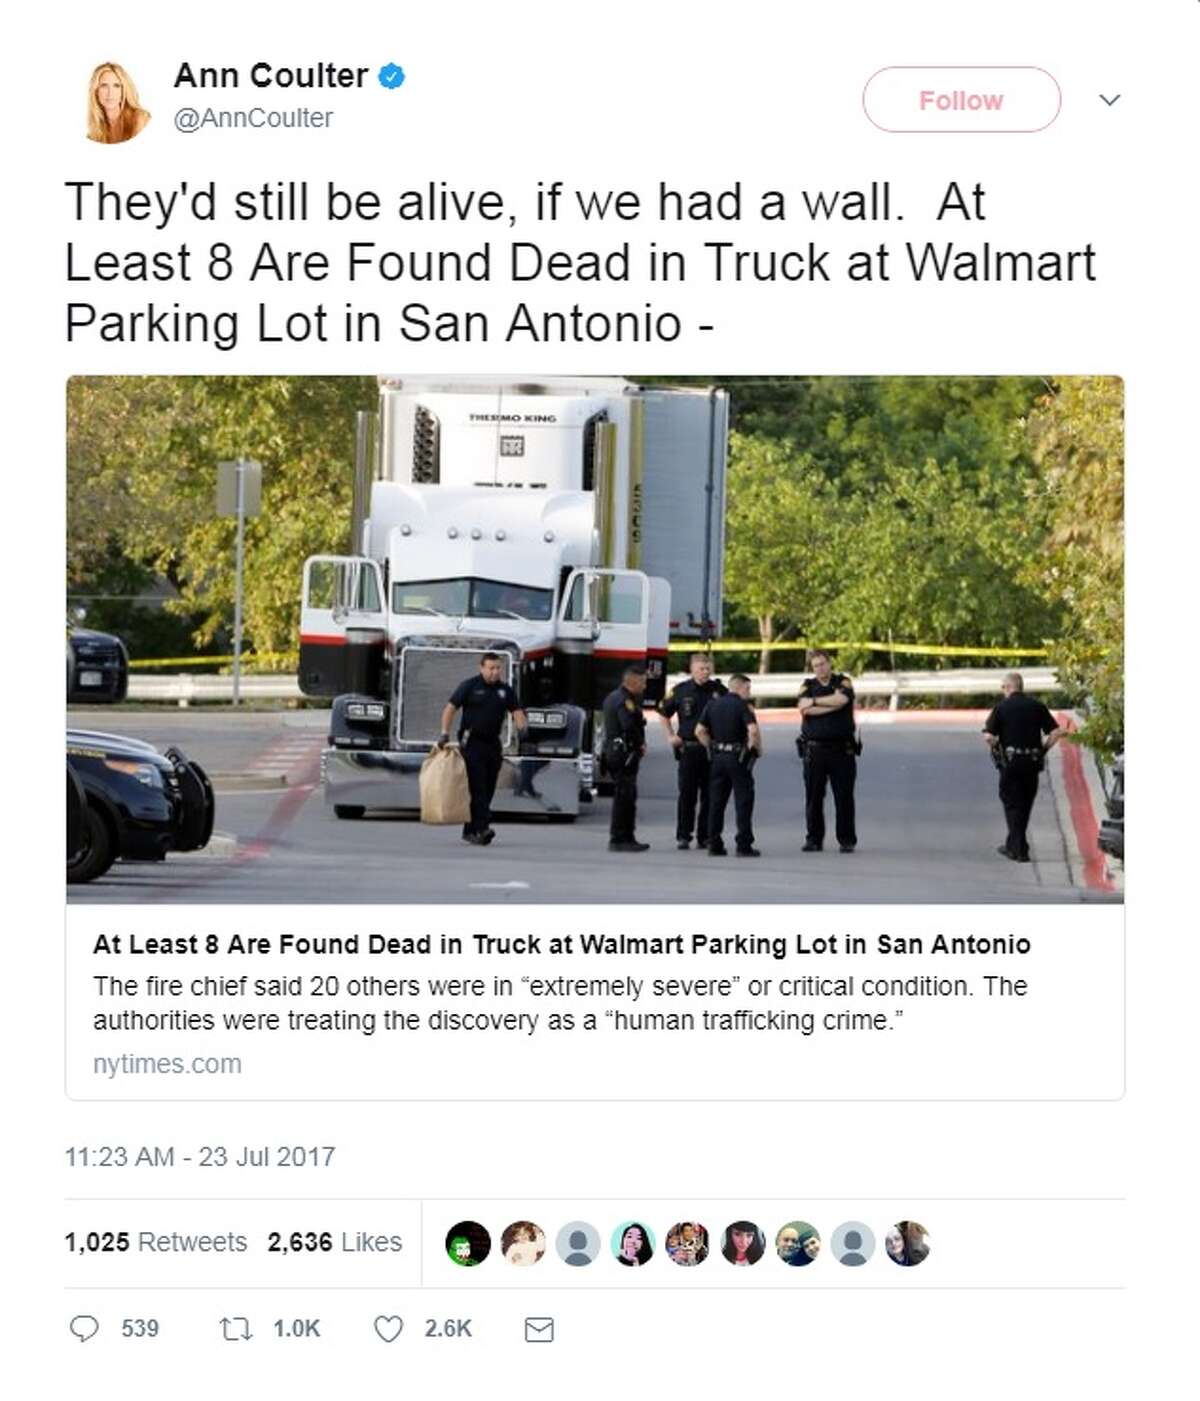 @AnnCoulter: "They'd still be alive, if we had a wall.  At Least 8 Are Found Dead in Truck at Walmart Parking Lot in San Antonio."